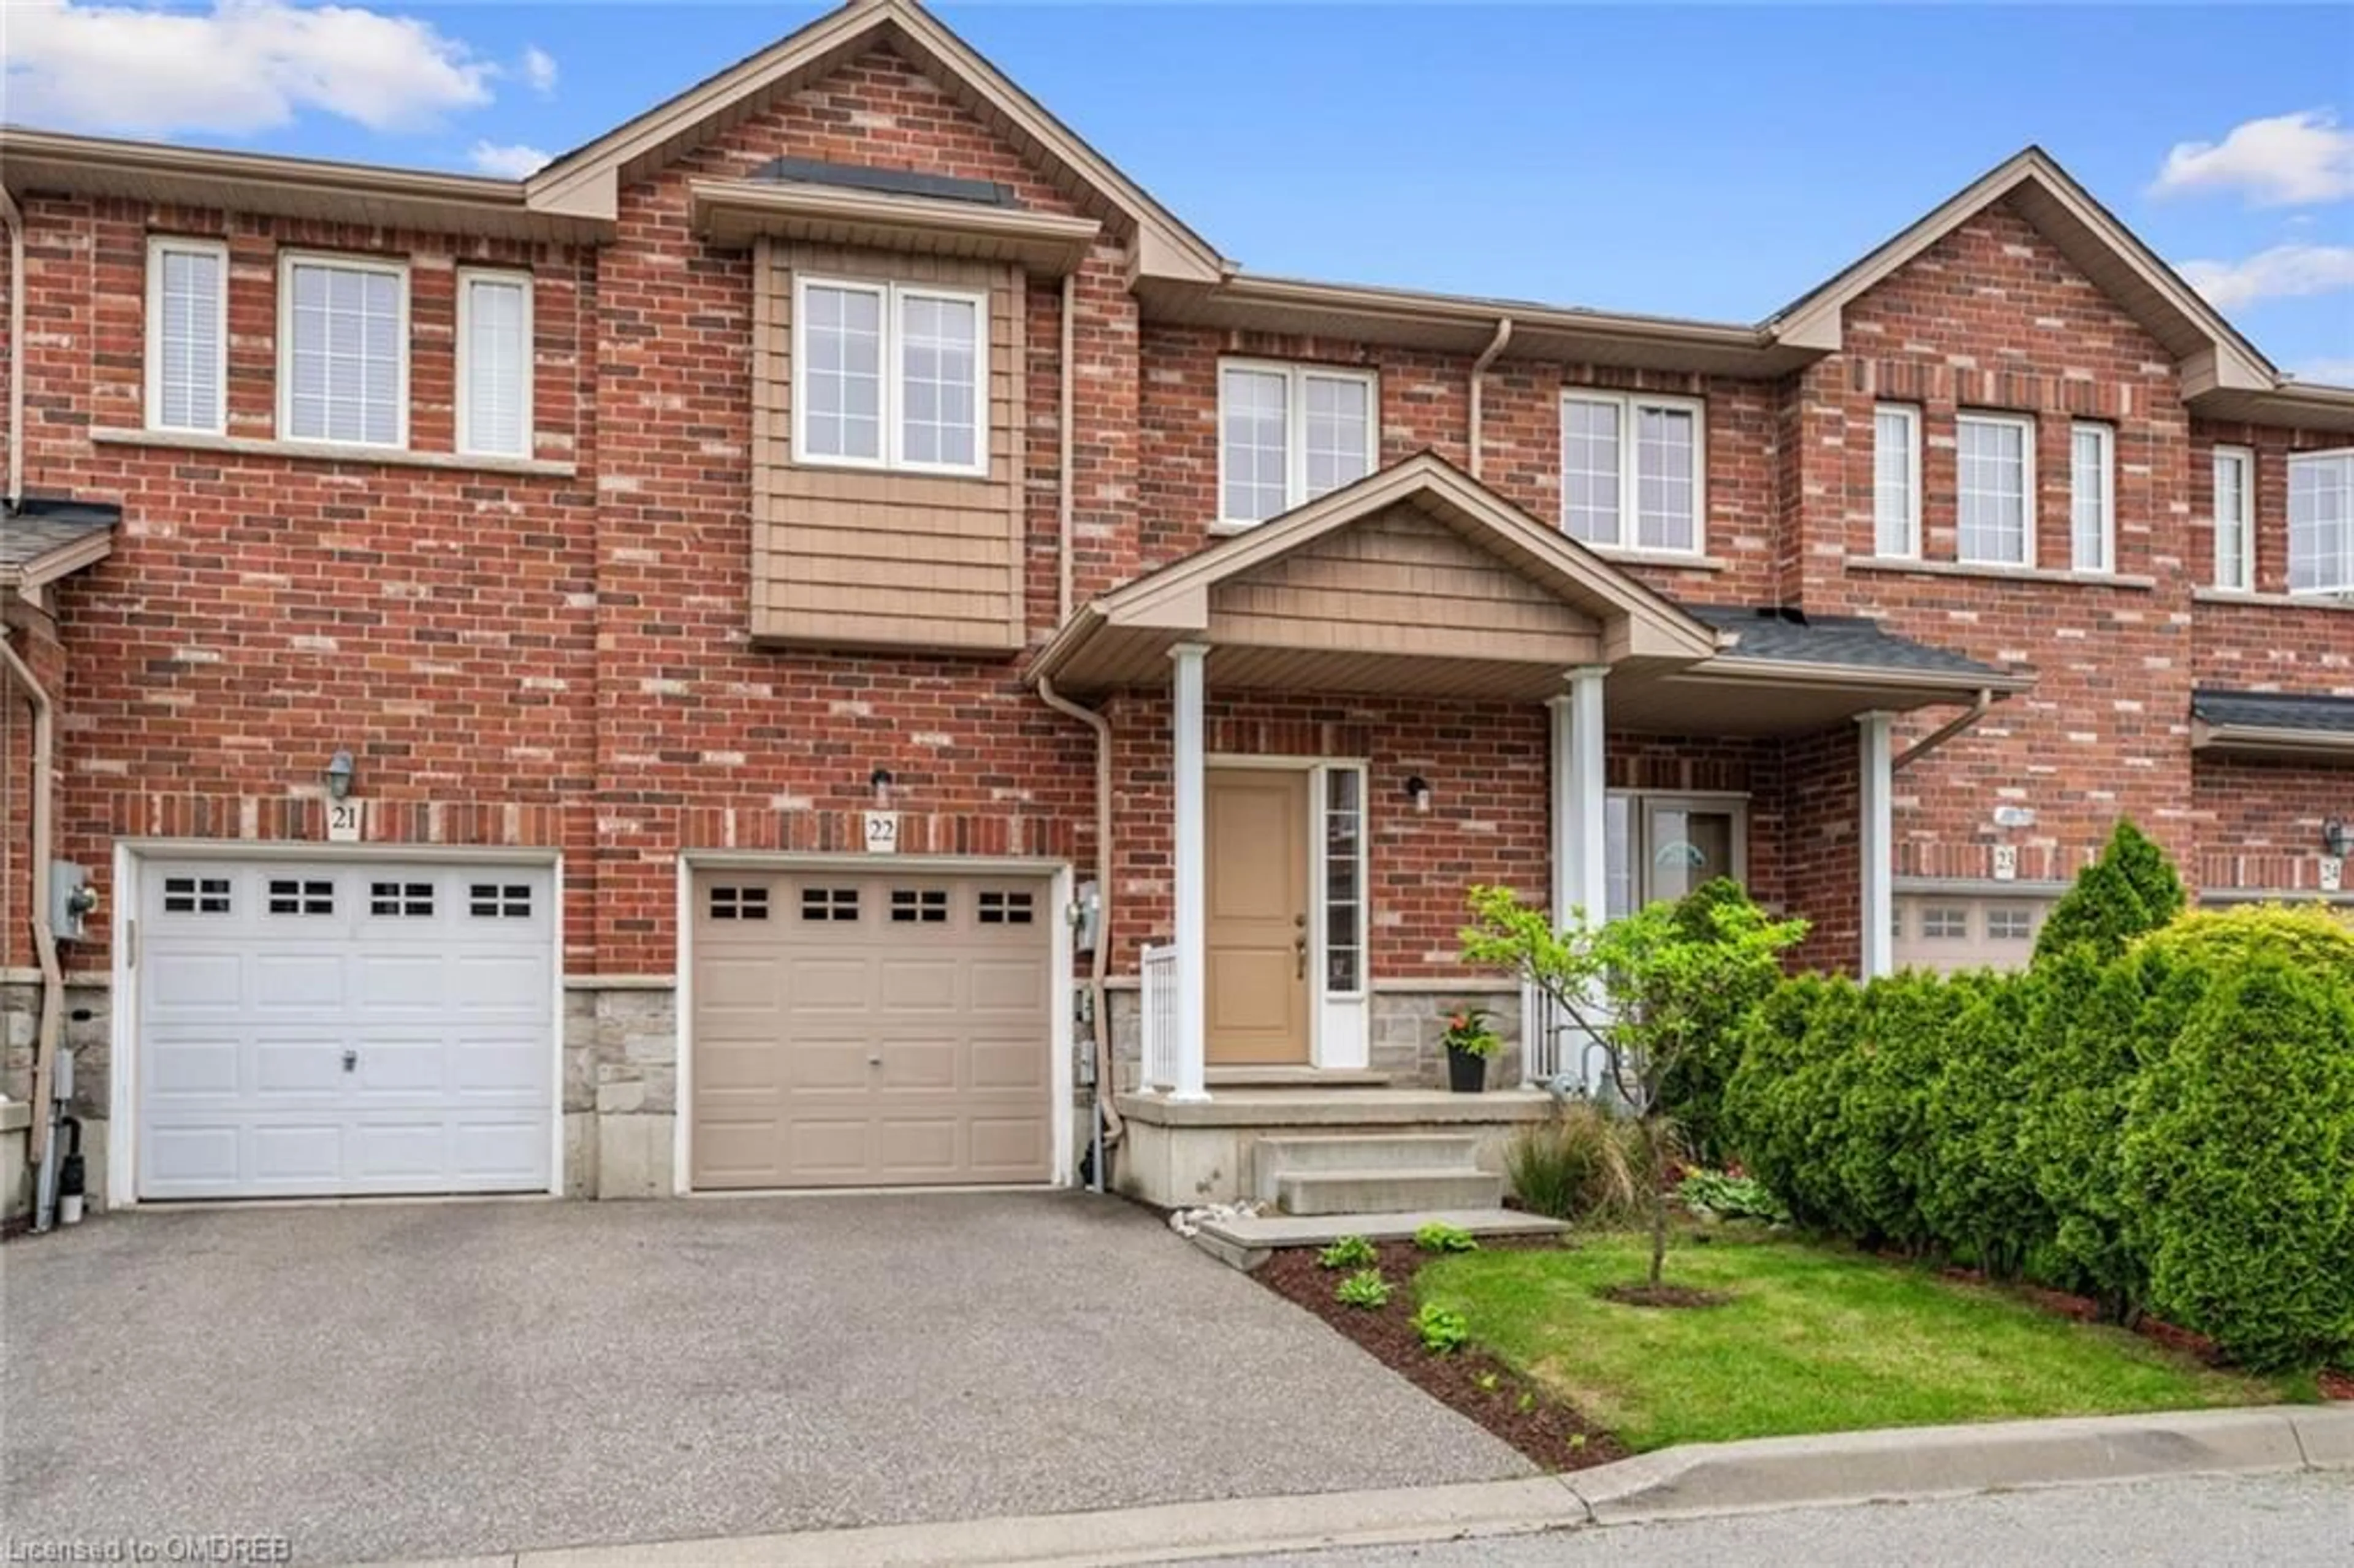 Home with brick exterior material for 45 Seabreeze Cres #22, Stoney Creek Ontario L8E 0G1